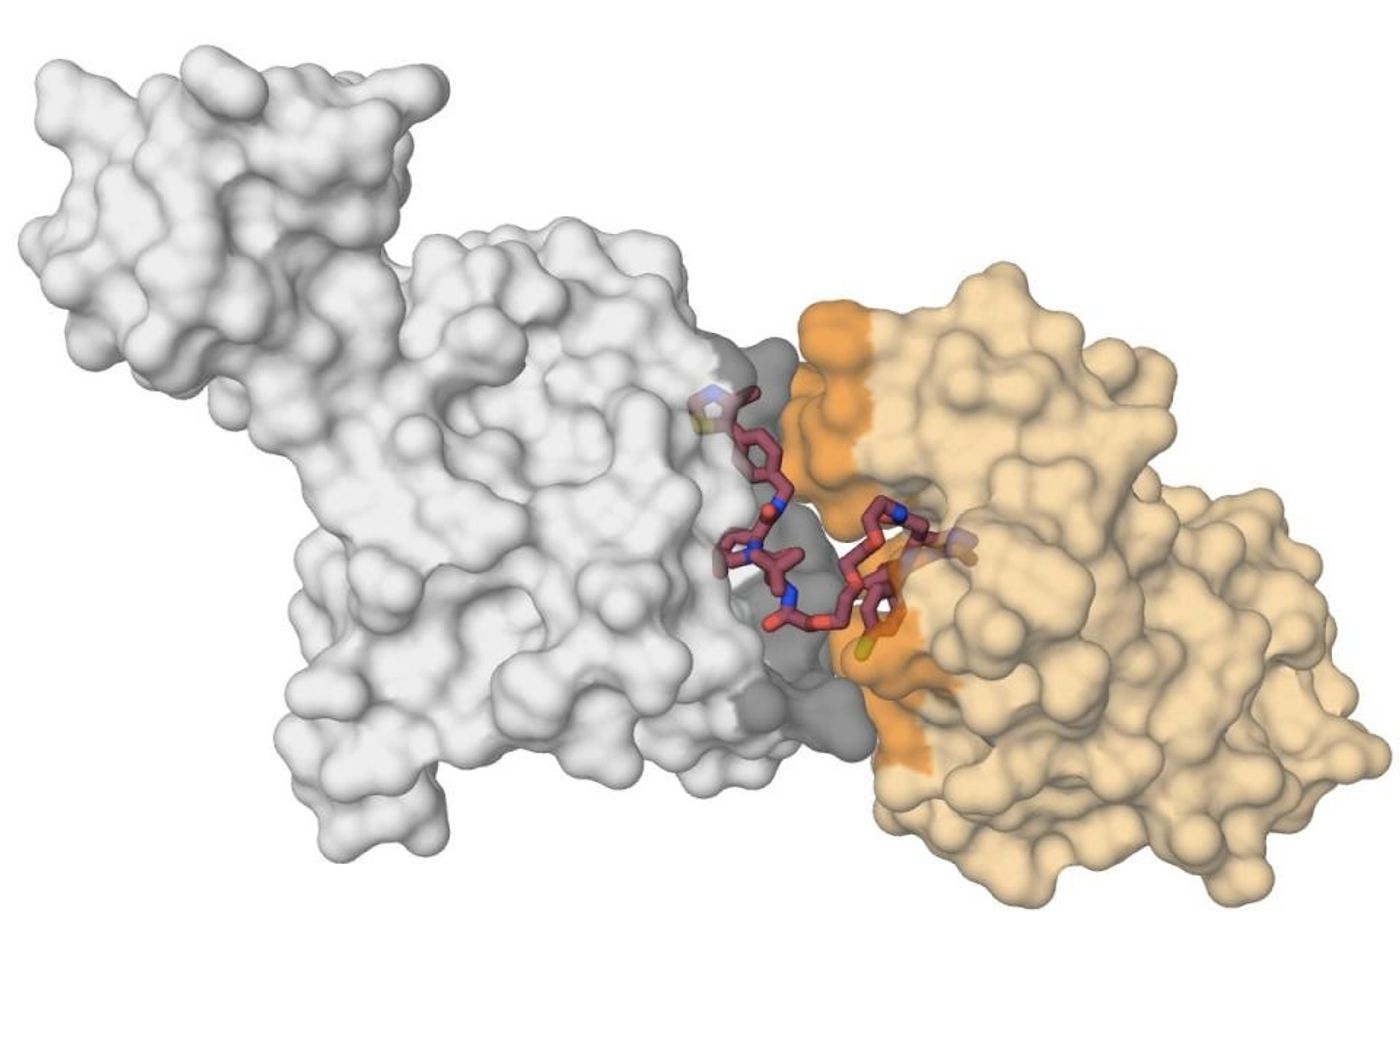 The E3 ligase protein VHL (in grey) in complex with the small molecule MZ1 (in raspberry) and 'kissing' the protein BRD4 (in yellow). Upon receiving this deadly `kiss', BRD4 is targeted for degradation. / Credit: Xavier Lucas, Alessio Ciulli, University of Dundee